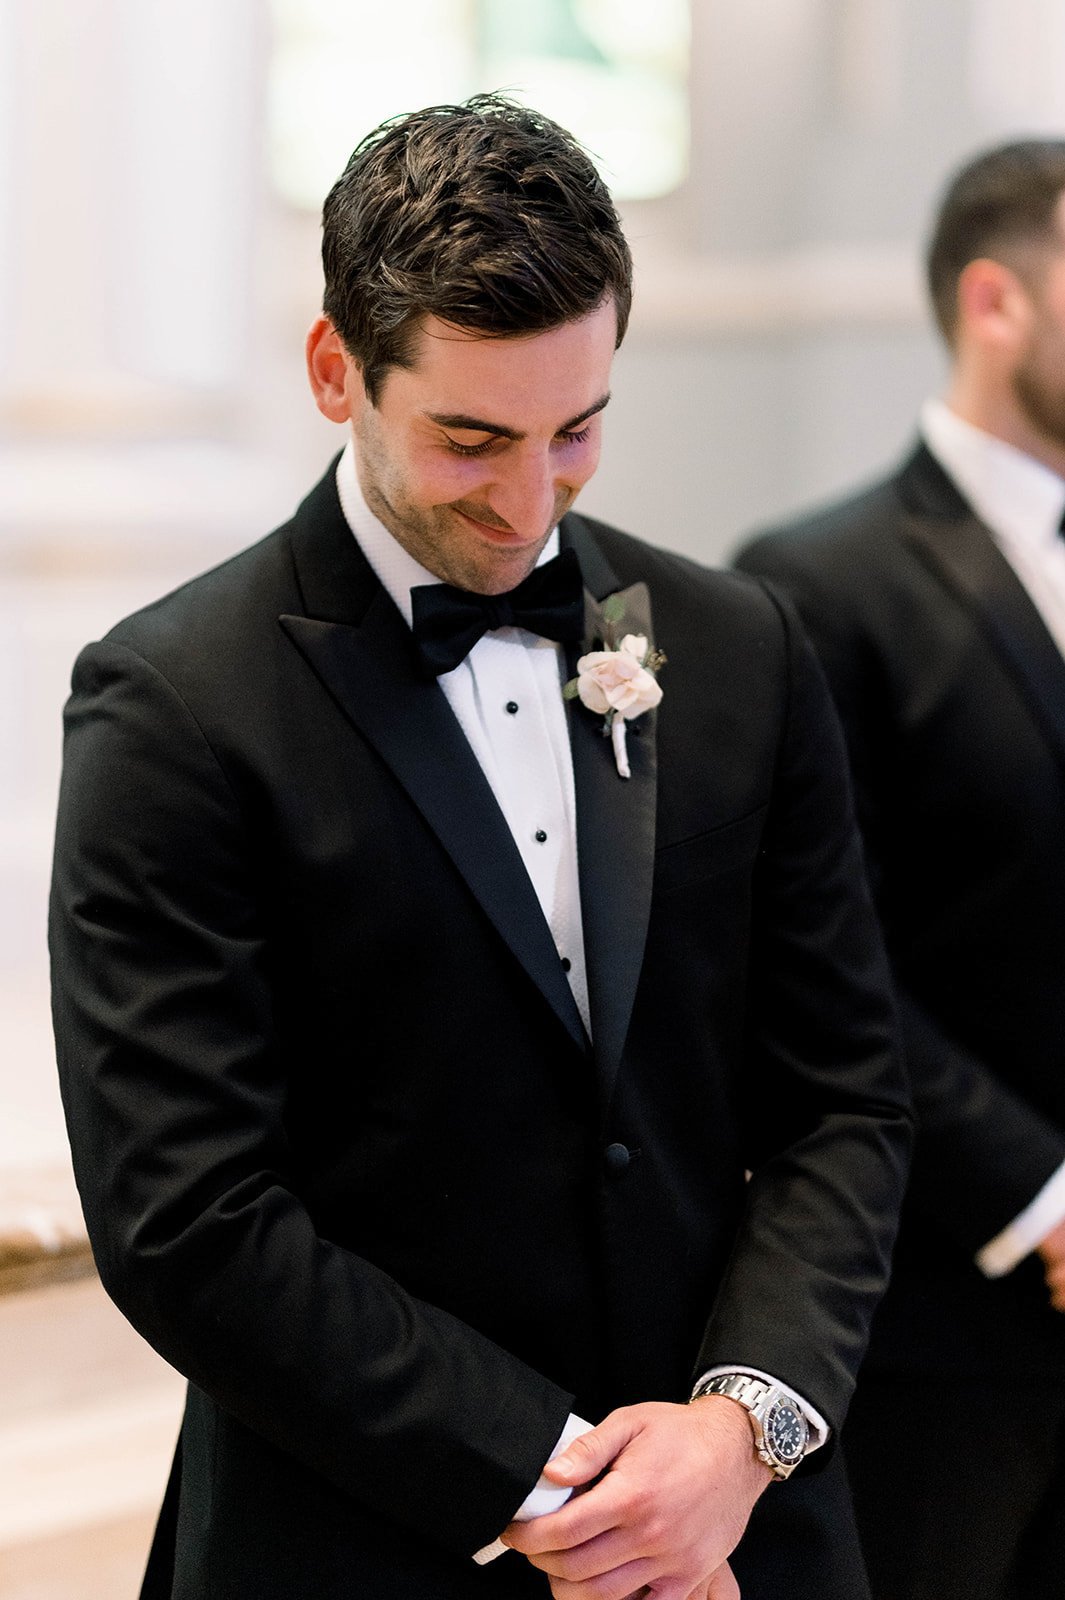 Groom smiles with hands clasped, his eyes cast downward.